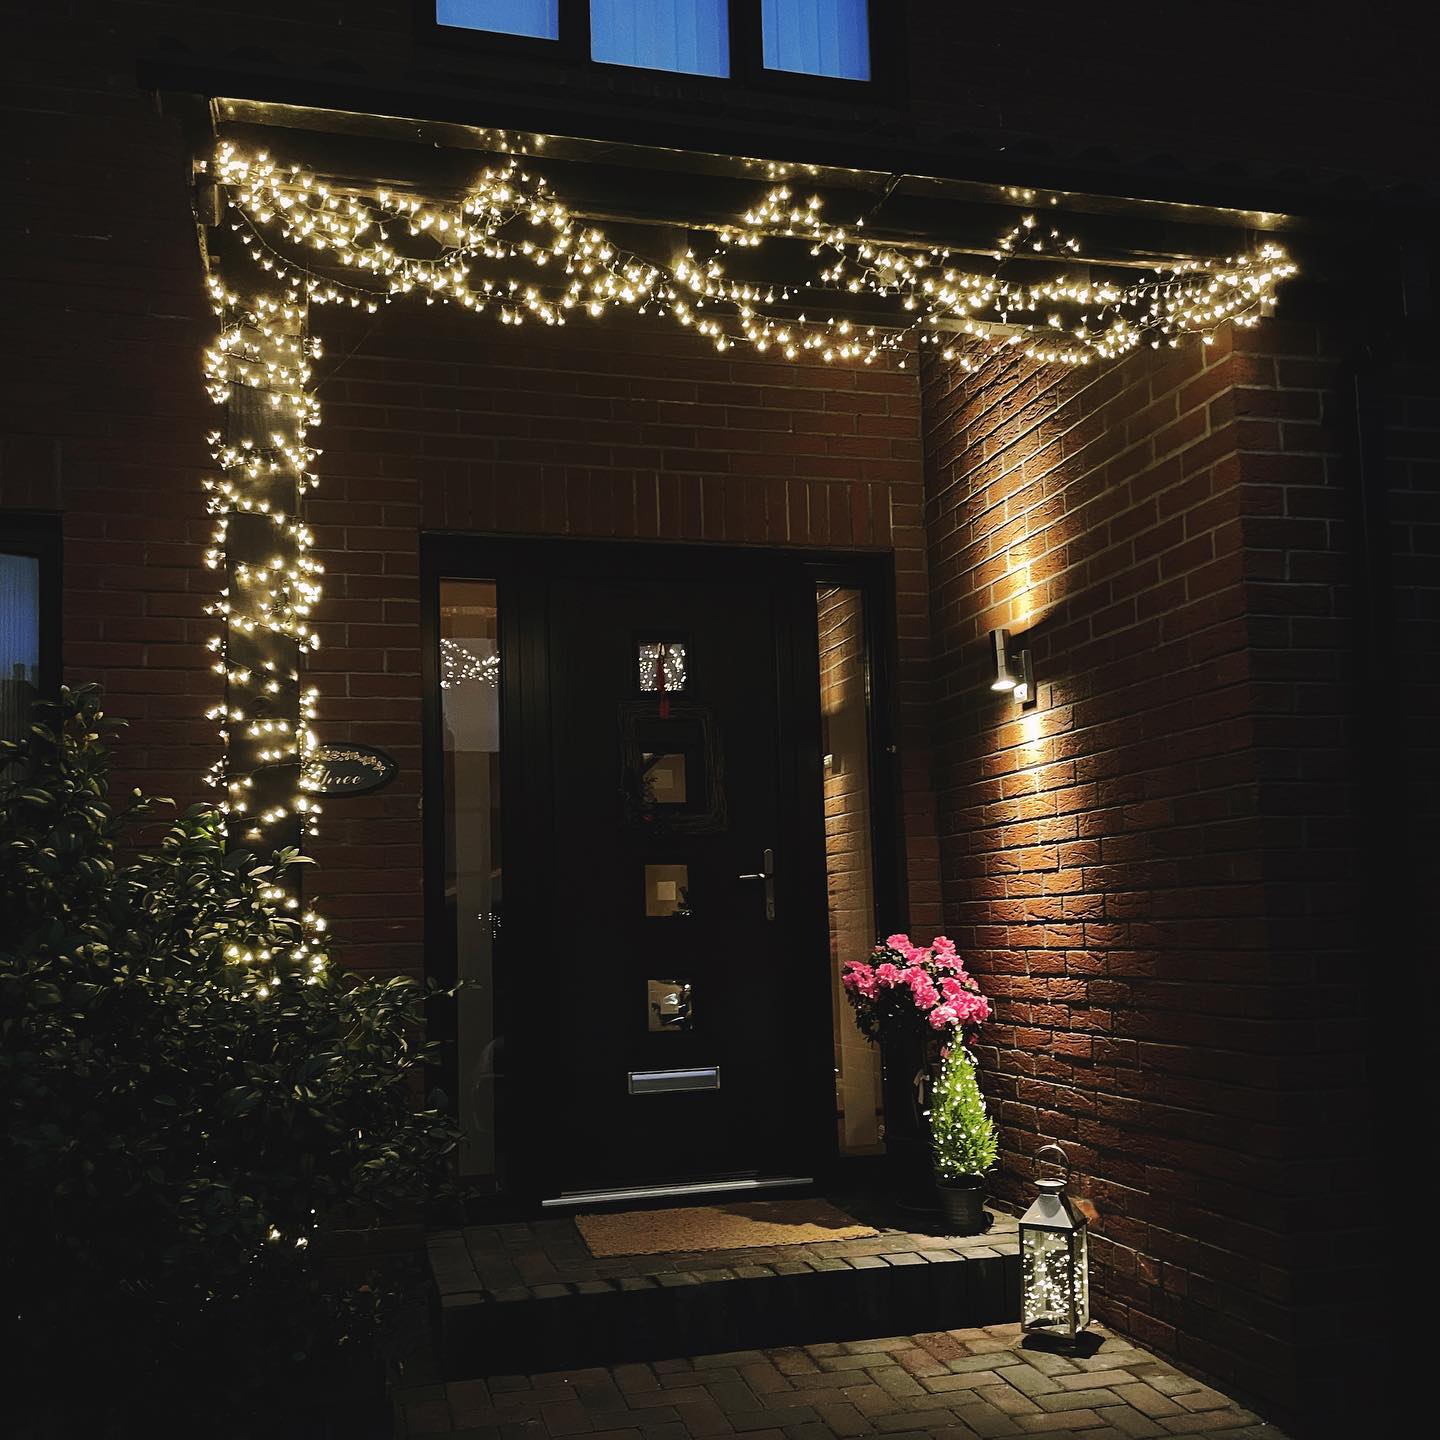 On the 15th of December.... our festive front door 

The lights are all from @creativegardensni - I do love my warm white lights as you know 

Had a lovely Christmas party for our church toddler group today (we may have all been dressed as elves!)

Do you have any outside Christmas lights? Let me know!